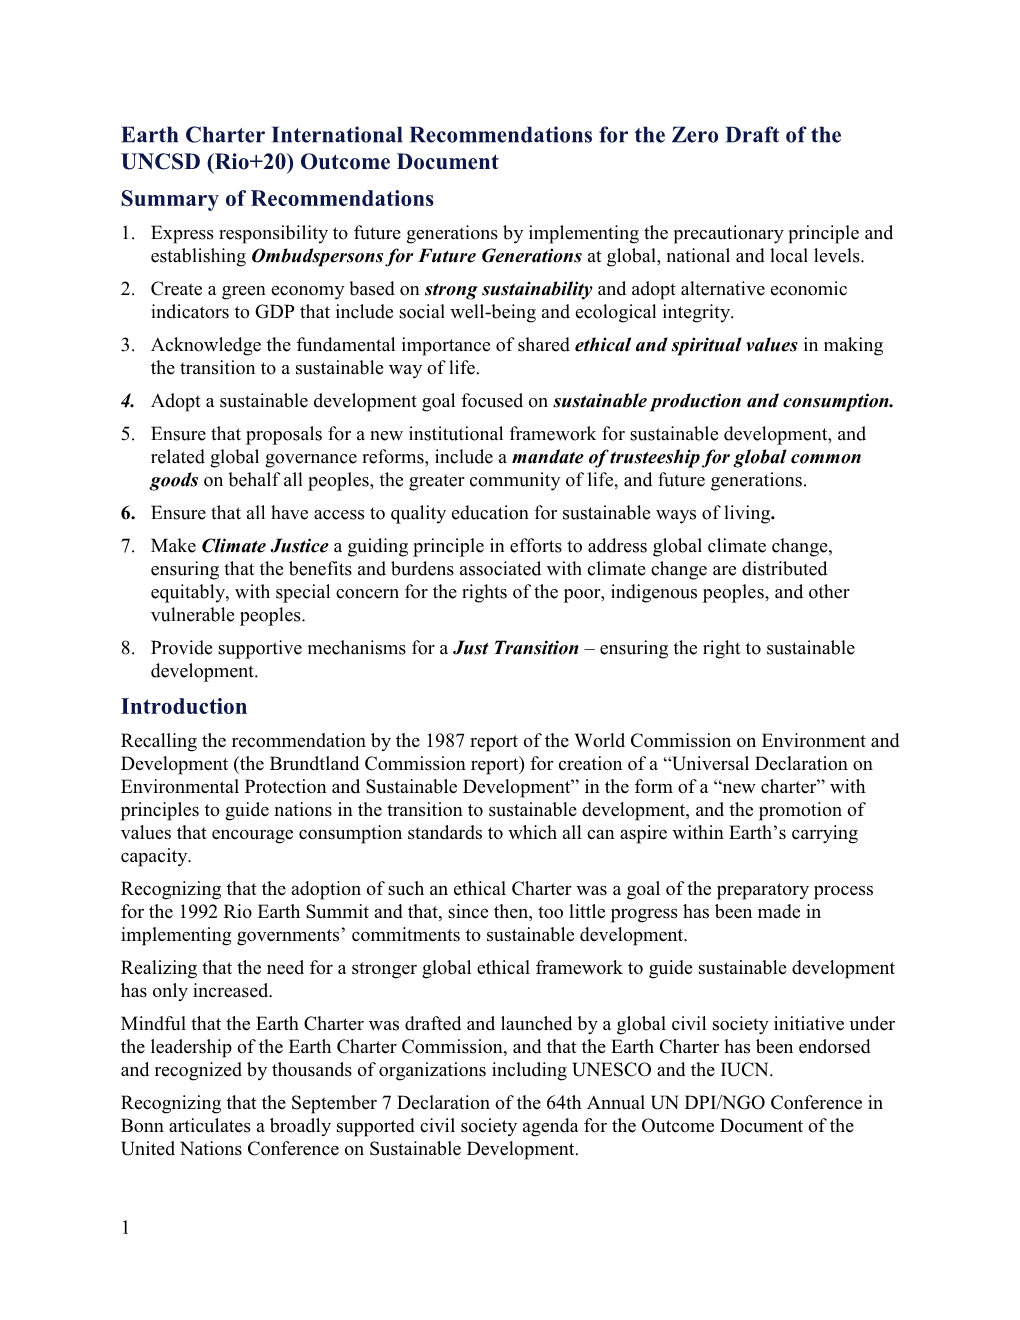 (Rio+20) Outcome Document Summary of Recommendations 1